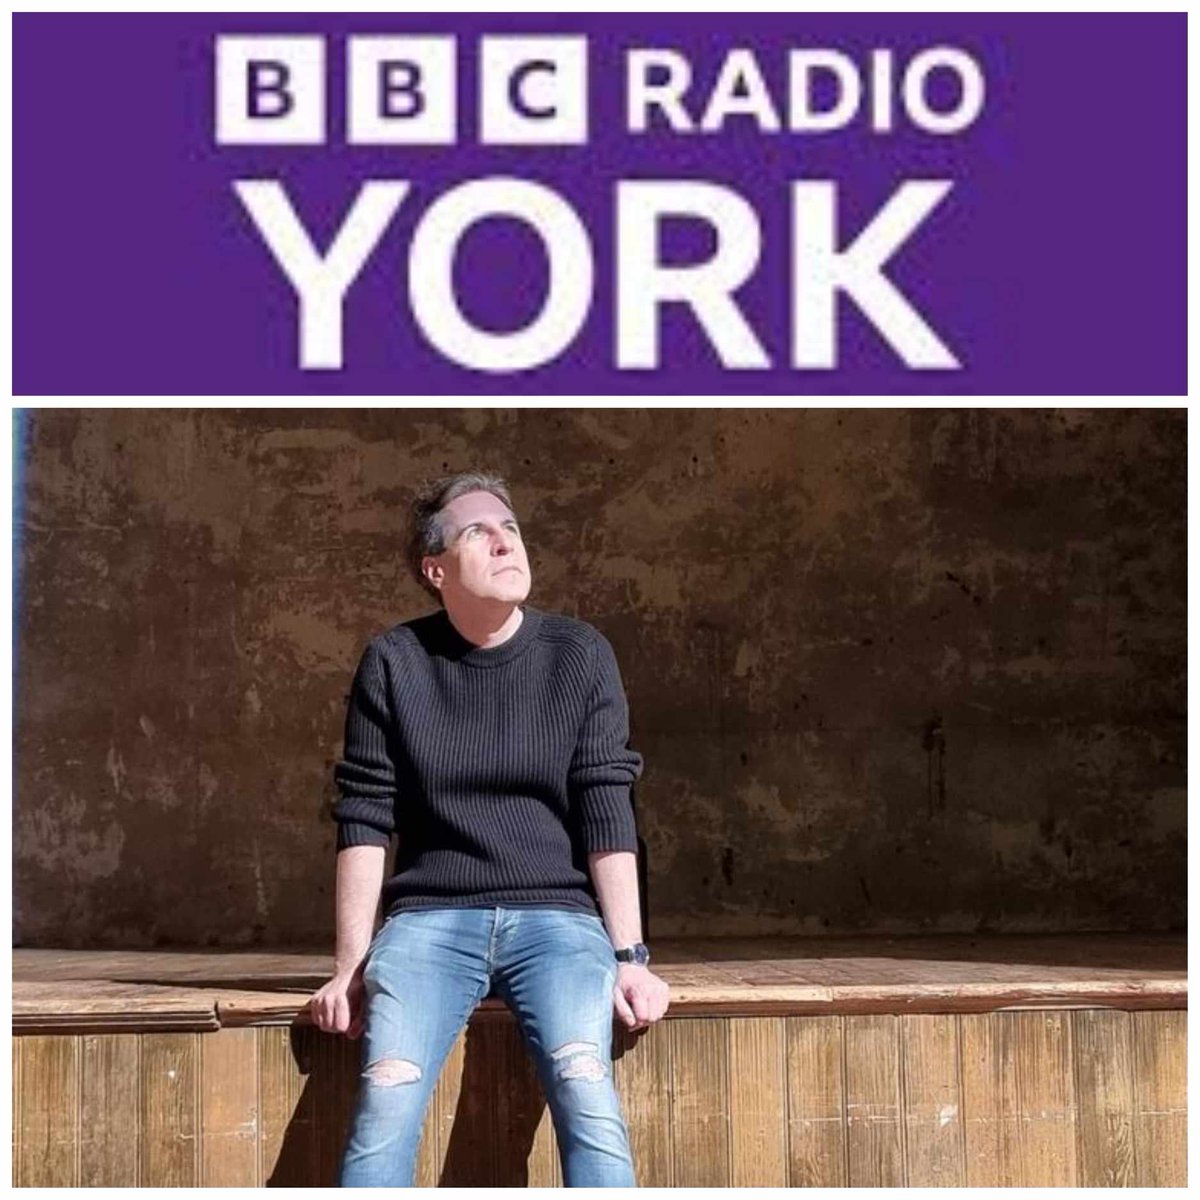 Spoke to Neil Foster at BBC Radio York today about autumn tour of “Howerd’s End”, calling at York’s Theatre@41 on 12th Oct. Full dates below. Interview 1 hr 12 mins in: 
bbc.co.uk/sounds/play/p0…
#Theatre #BBCRadio #York #Tour #HowerdsEnd markfarrelly.co.uk/2015-schedule/